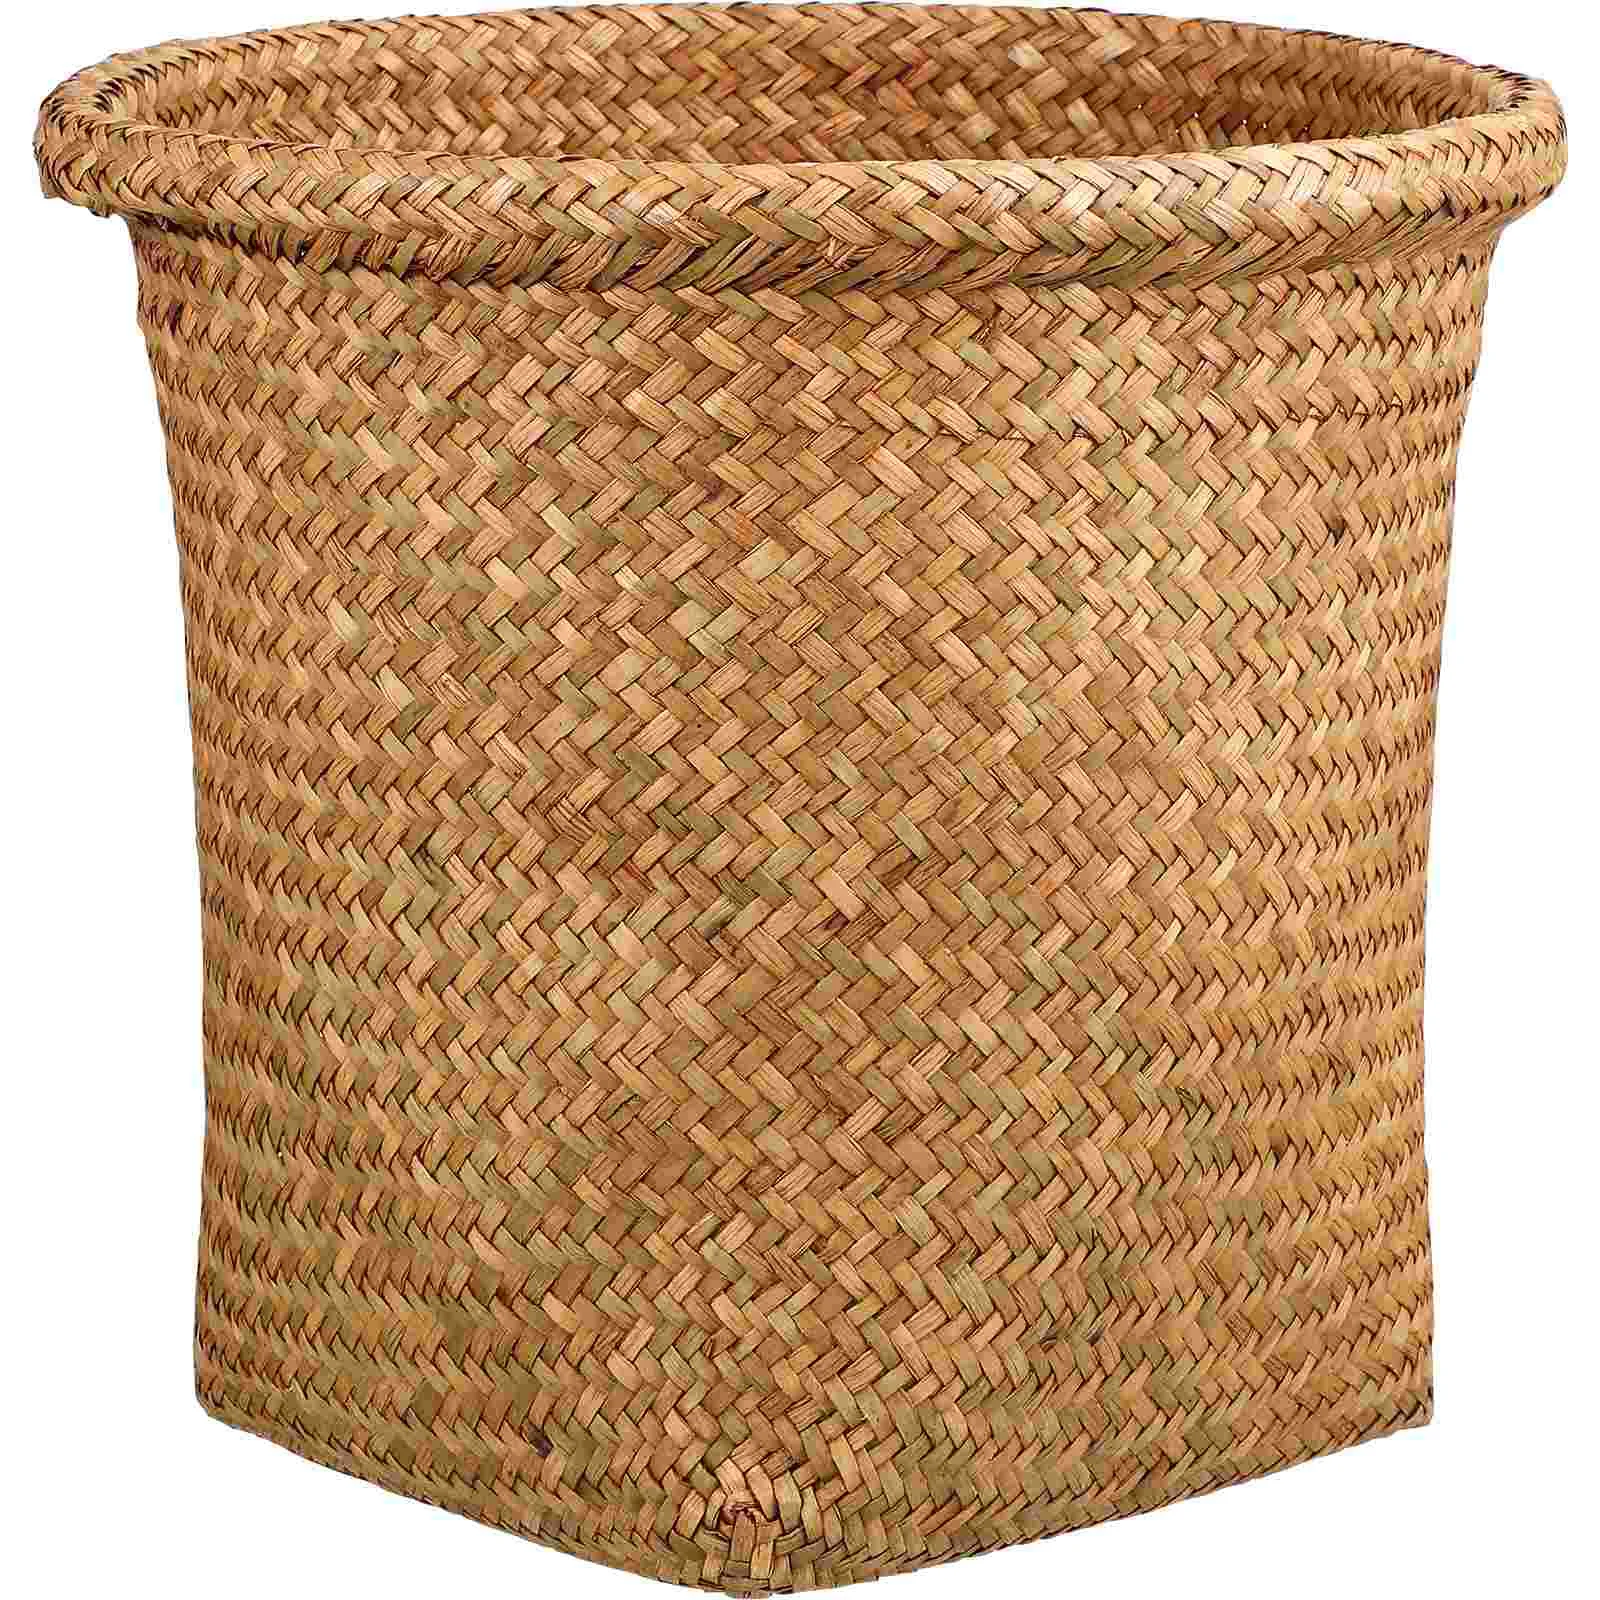 

Round Trash Can Woven Cans Wicker Waste Basket Household Laundry Hampers Baskets Home Rattan Storage